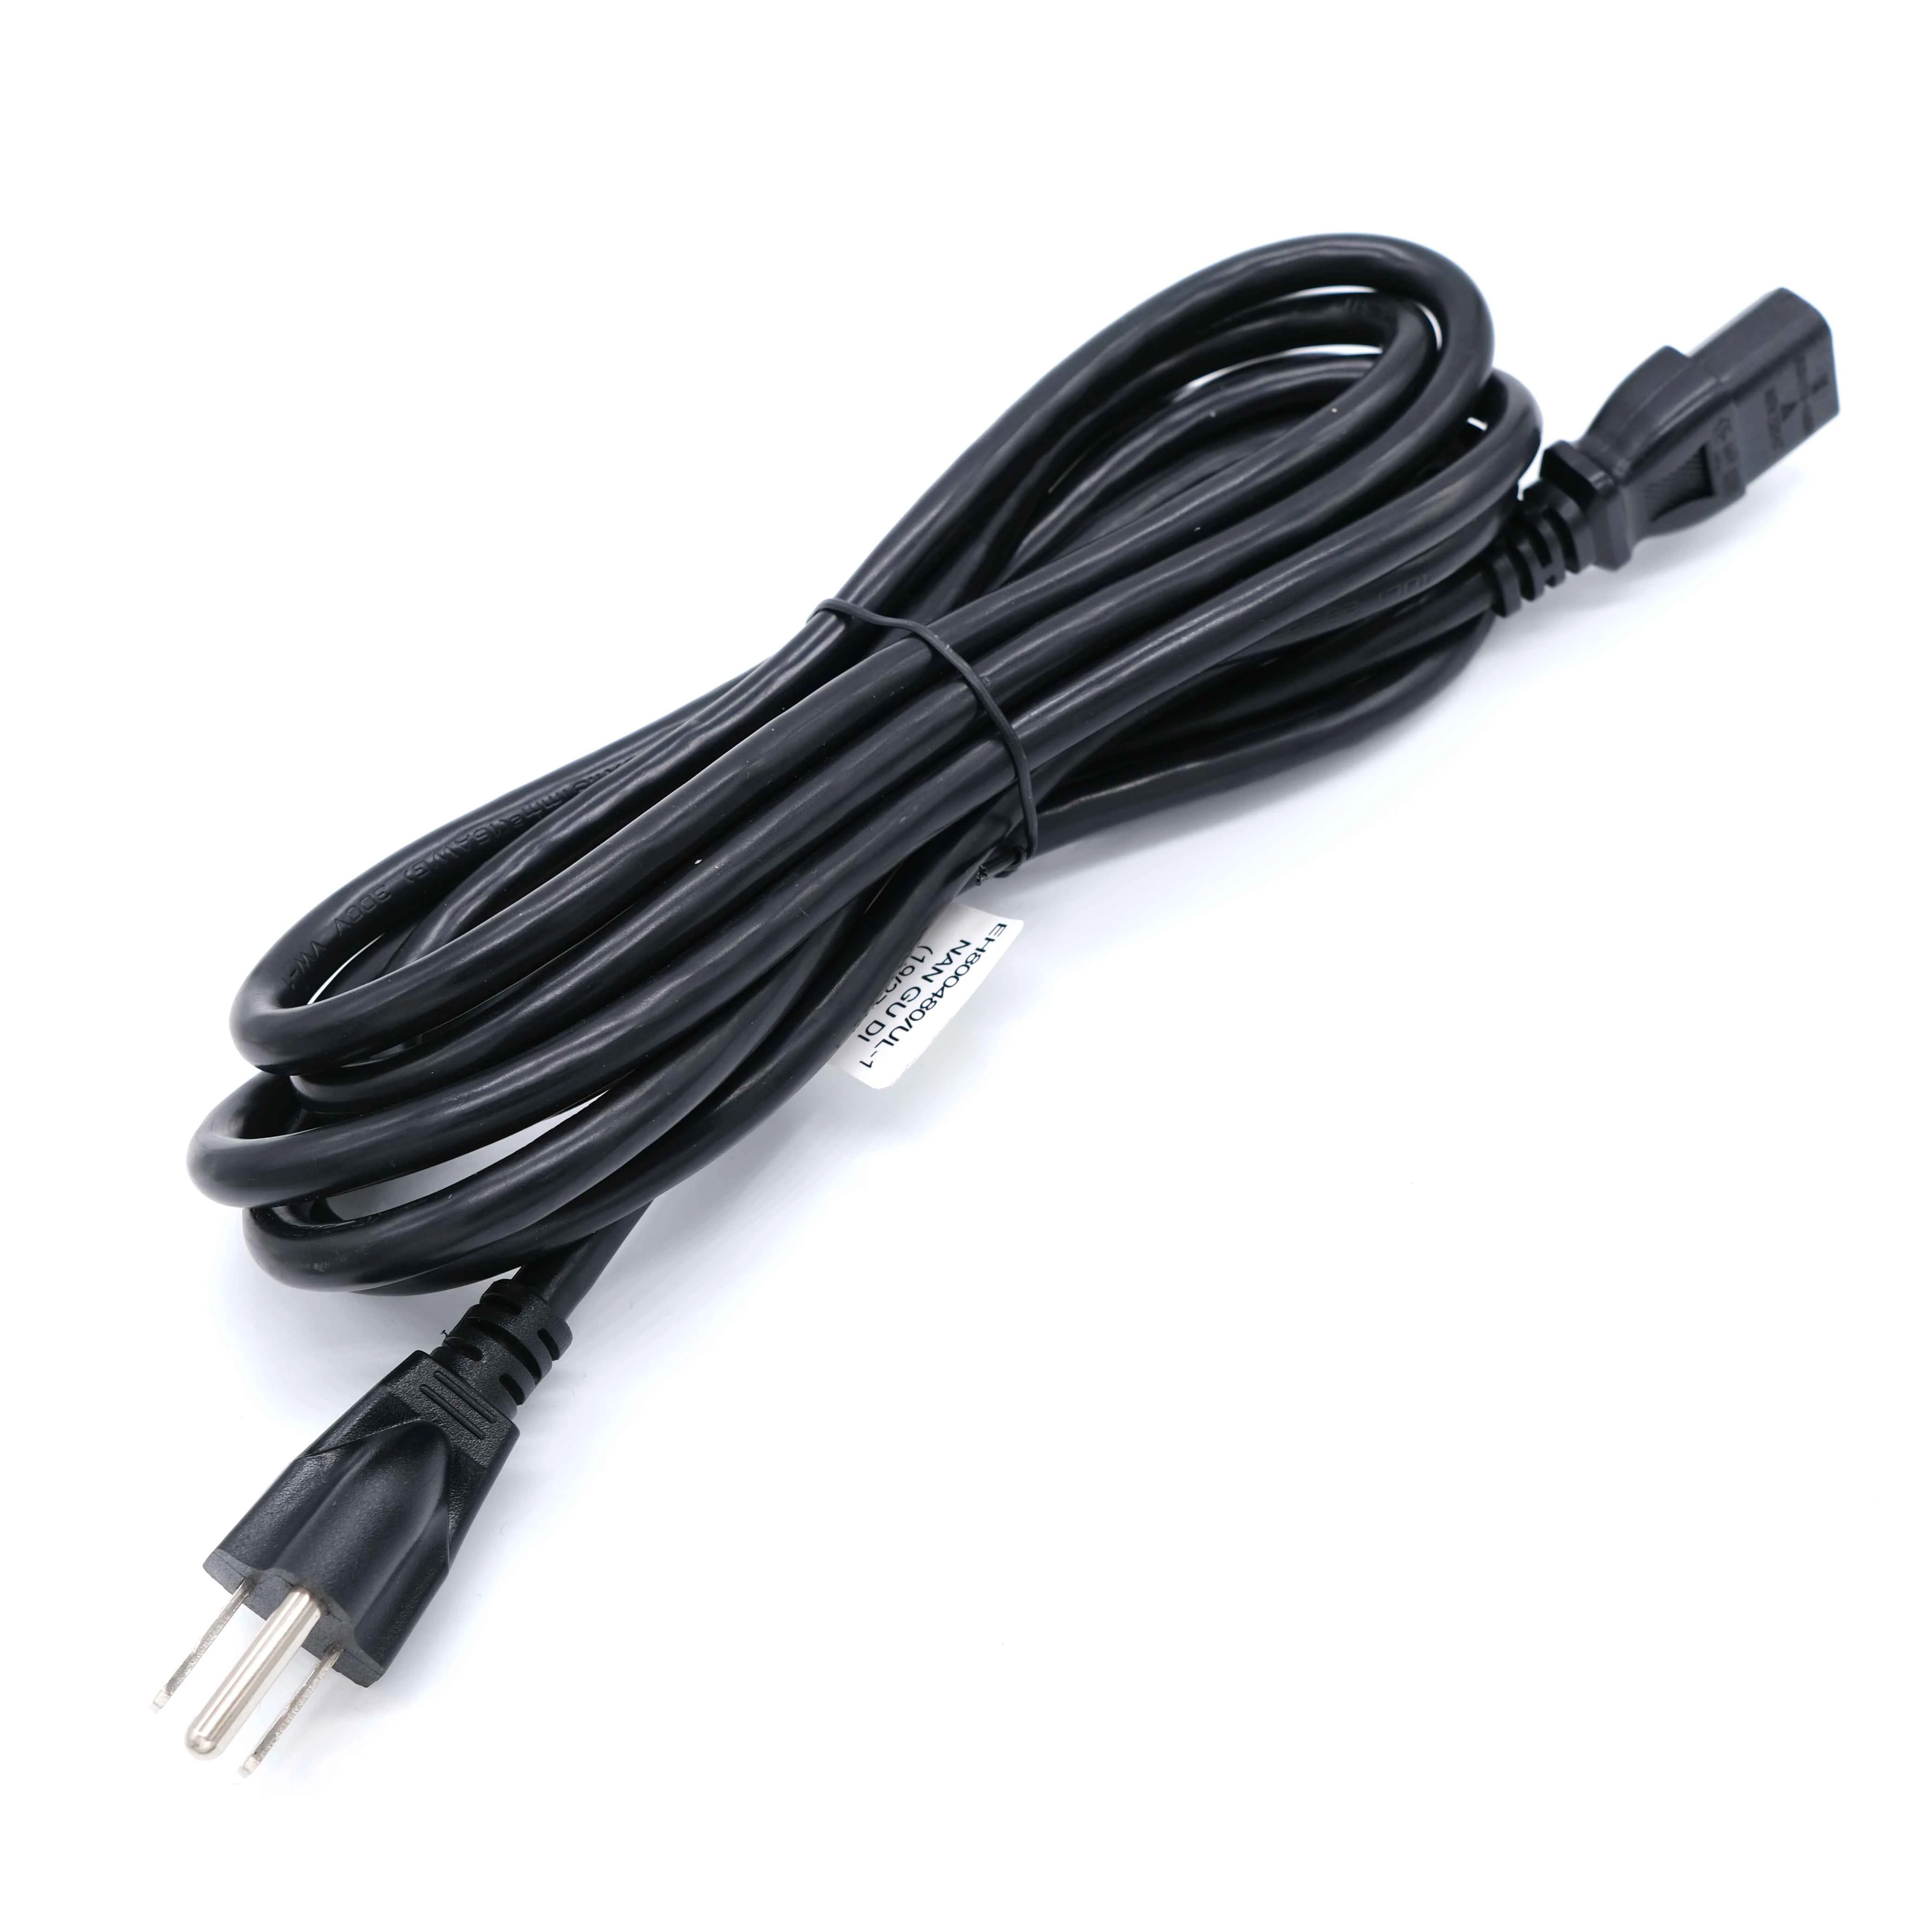 US Power Cable Type B USA Plug IEC C13 Power Extension Cord 1.2m 4ft 14AWG For Desktop PC Computer Monitor PSU Antminer Printer